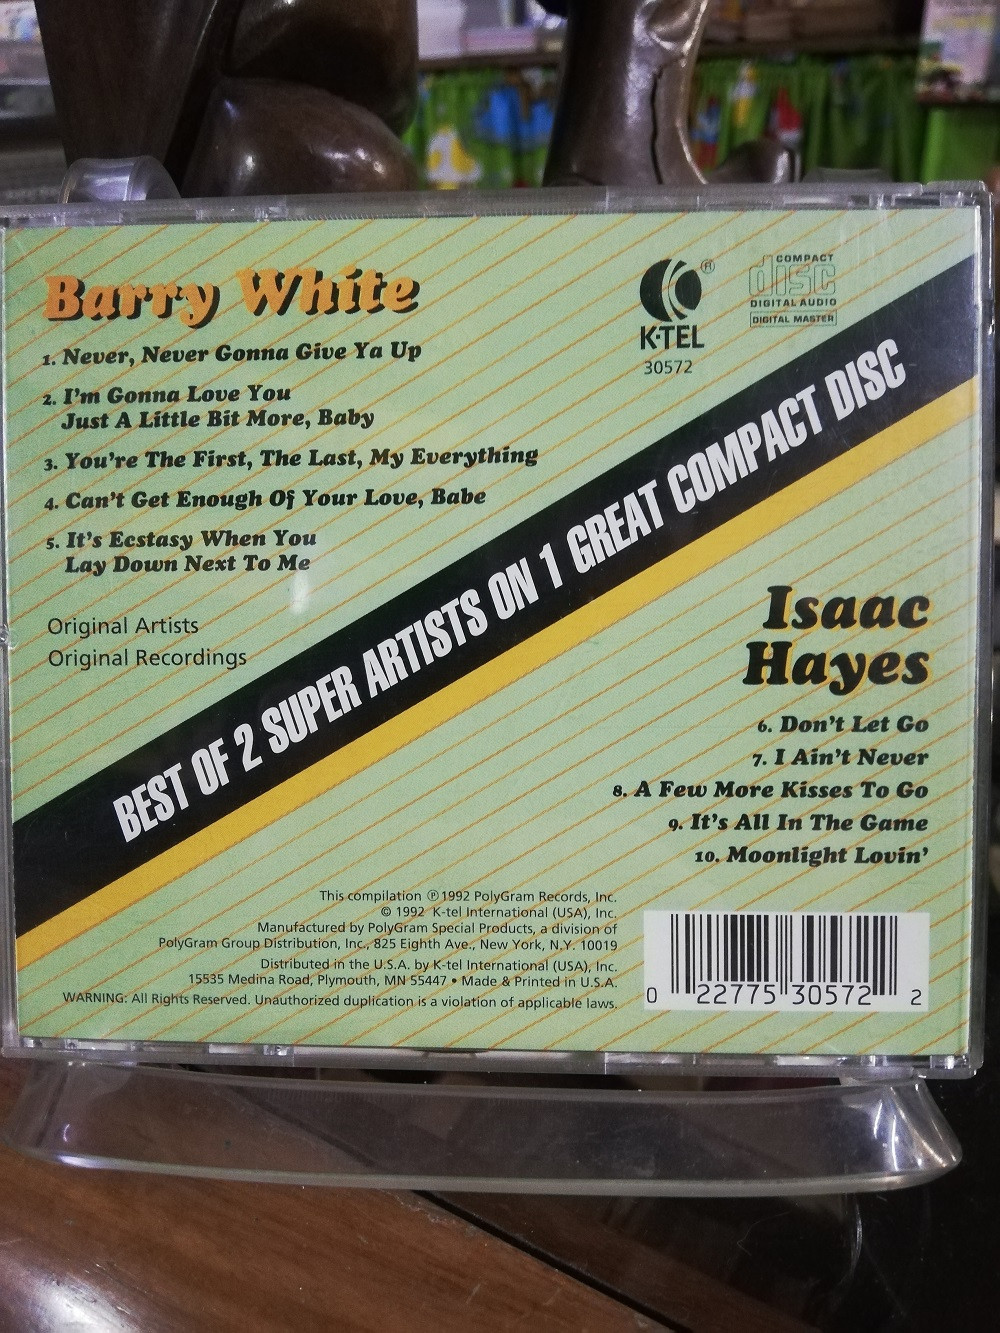 Imagen CD BARRY WHITE/ISAAC HAYES - BEST OF 2 SUPER ARTISTS 2